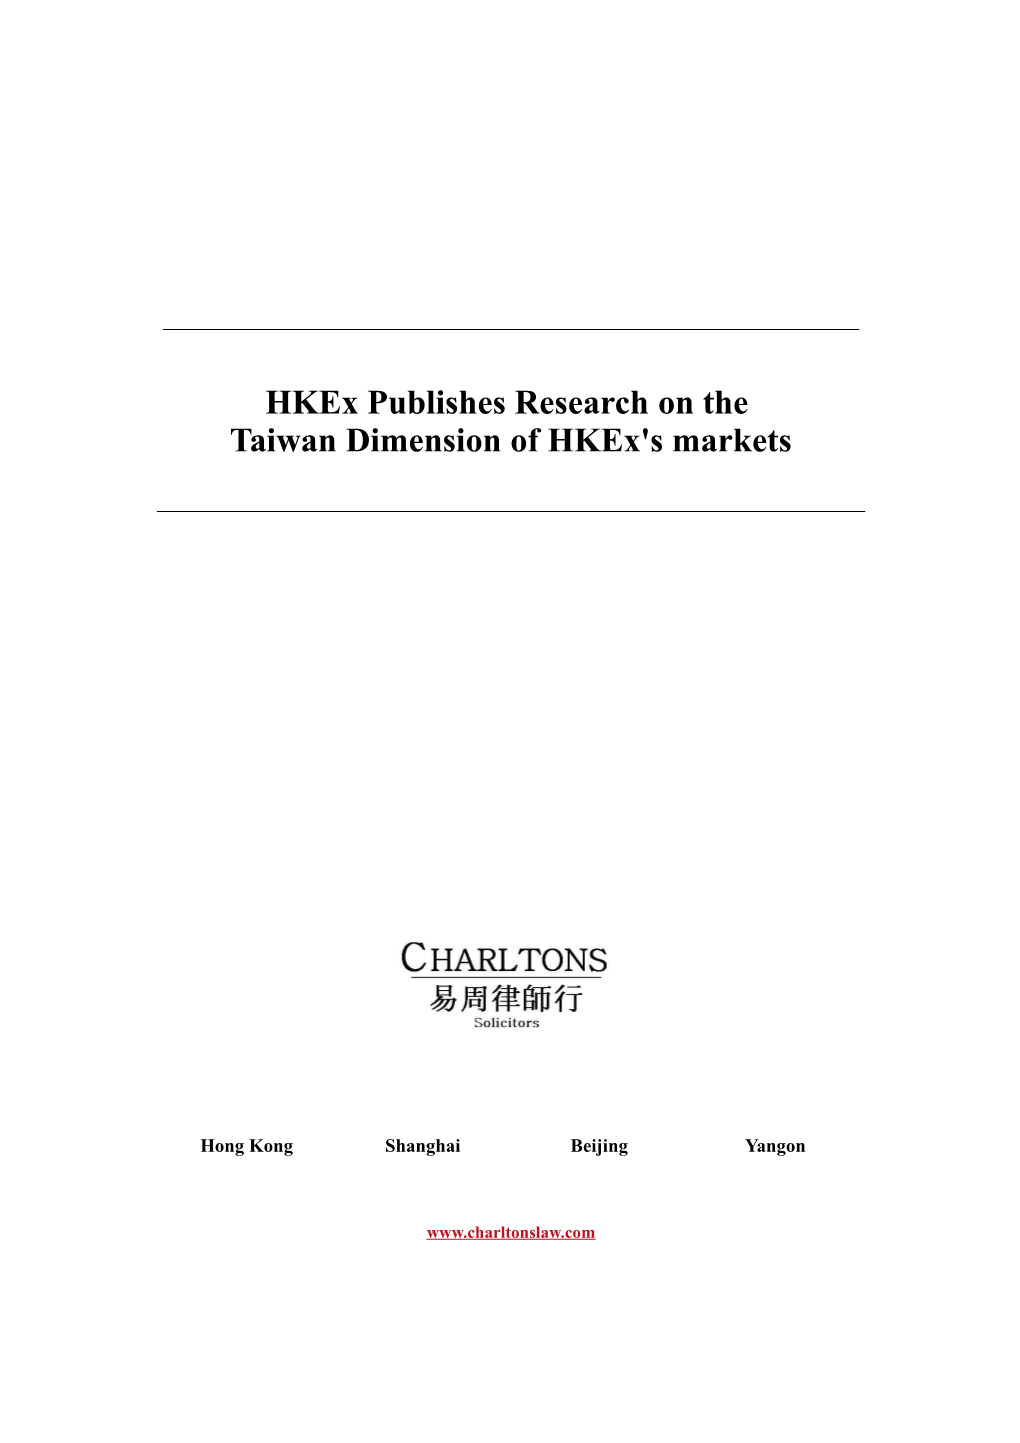 Hkex PUBLISHES RESEARCH on the TAIWAN DIMENSION of Hkex S MARKETS